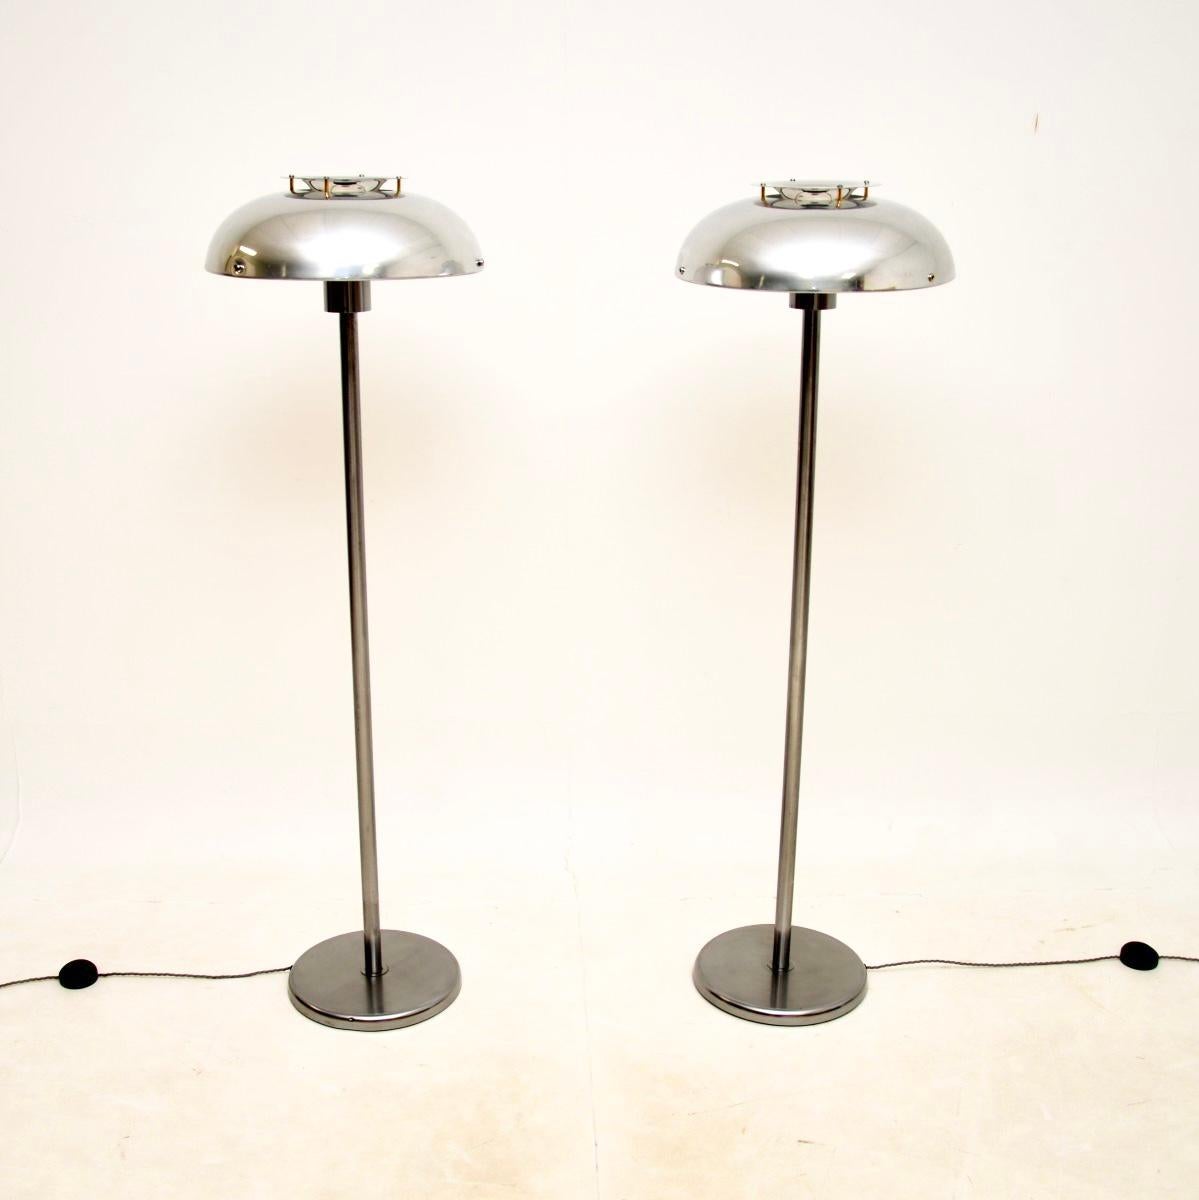 A stylish and extremely well made pair of vintage Swedish chrome floor lamps by Borens. They were recently imported from Sweden, they date from around the 1960-70’s.

The quality is outstanding, the chrome frames are beautifully designed and they